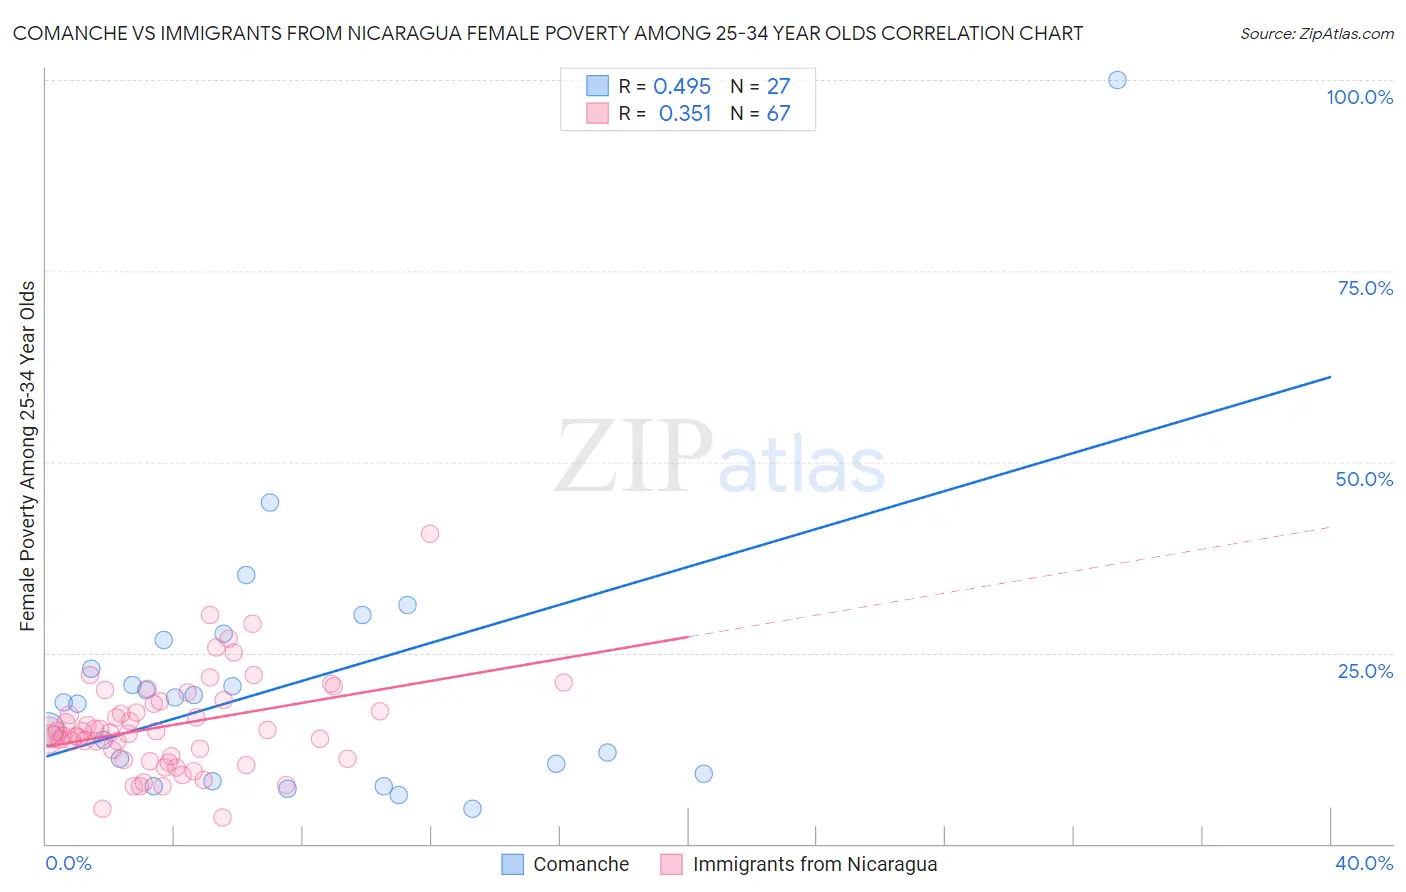 Comanche vs Immigrants from Nicaragua Female Poverty Among 25-34 Year Olds